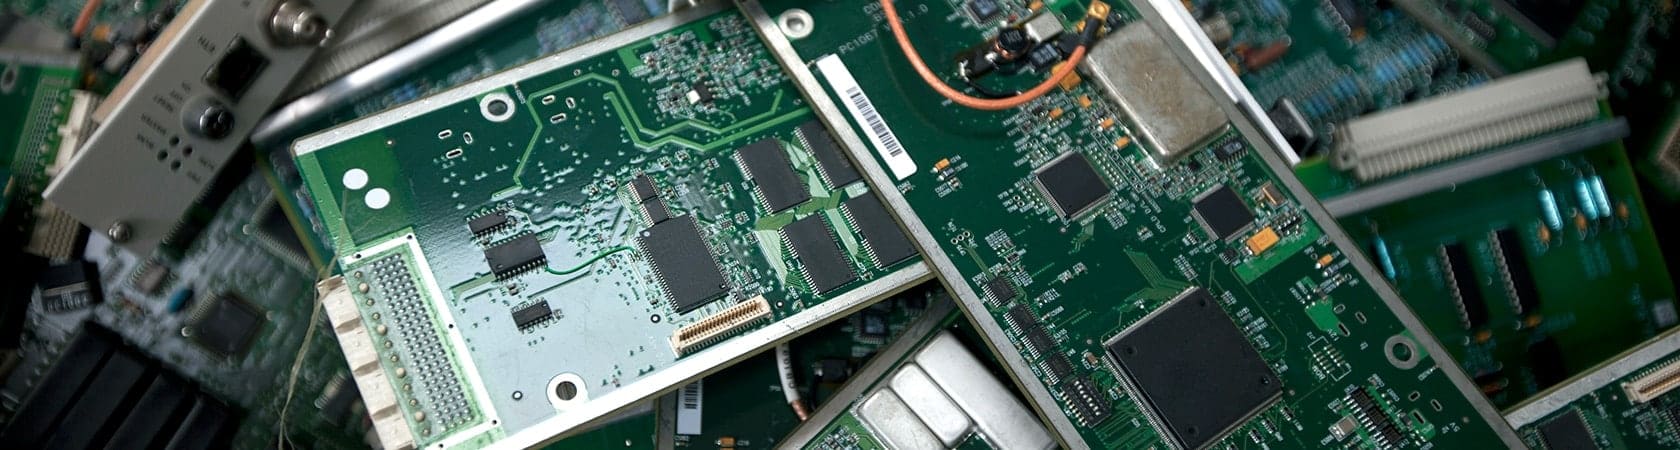 It’s All Connected: E-Waste and Corporate Right to Repair